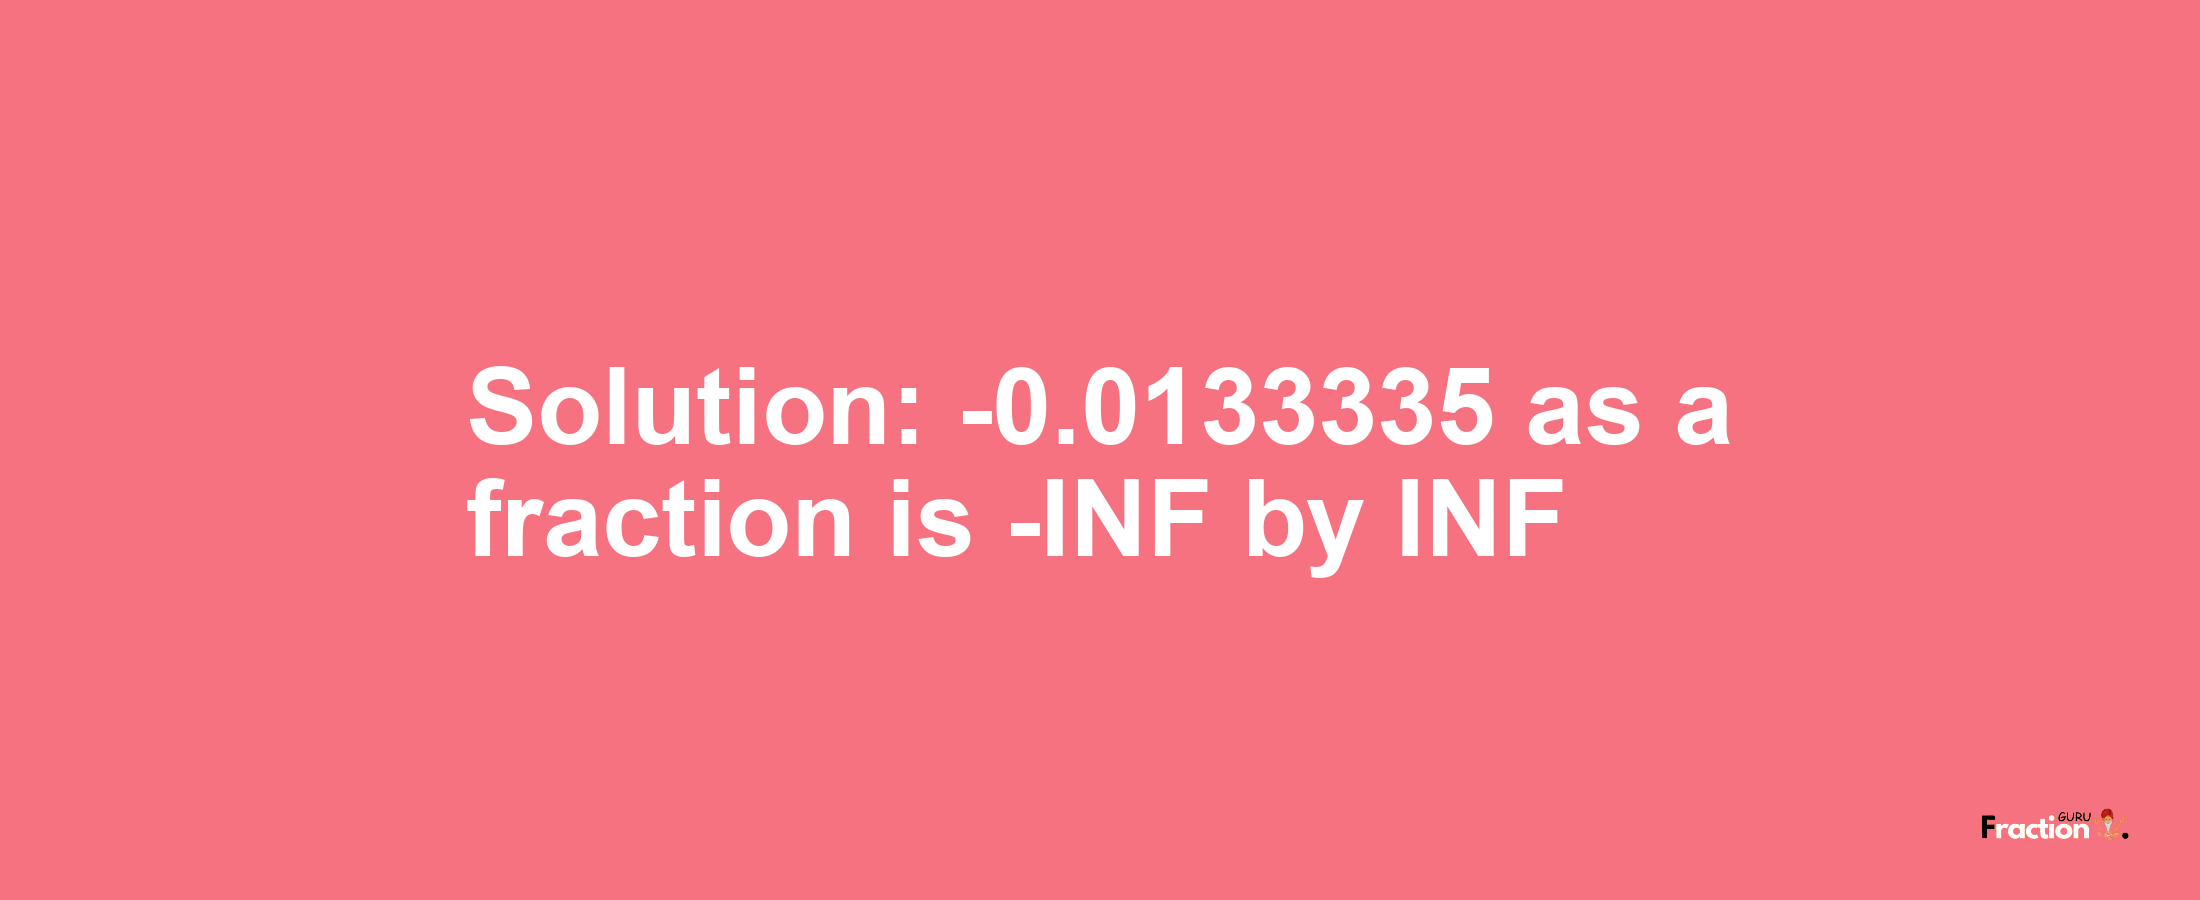 Solution:-0.0133335 as a fraction is -INF/INF